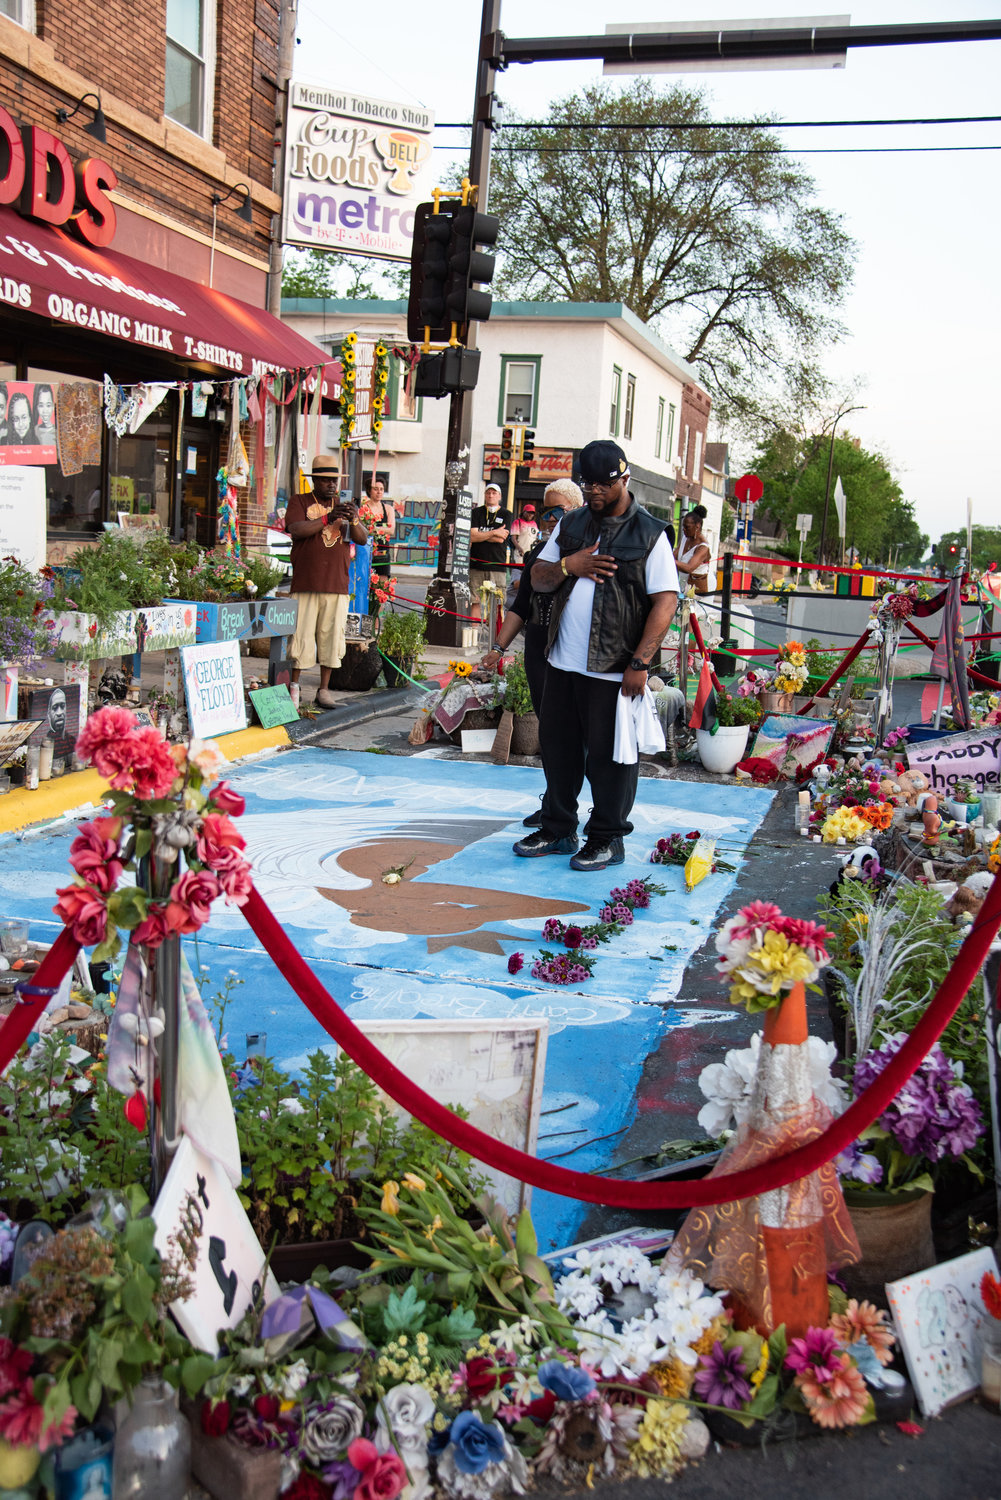 People gathered May 25-28, 2022 to commemorate the 2nd angelversary of George Floyd’s death. Others lost to police violence were remembered, and their families, who continue to push for change, were honored. Above, Terrence Floyd, George’s brother from New York, pays his respects at the site on Chicago Ave. where his brother was killed by police on May 25, 2020. More on page 7. (Photo by SBH Photography)